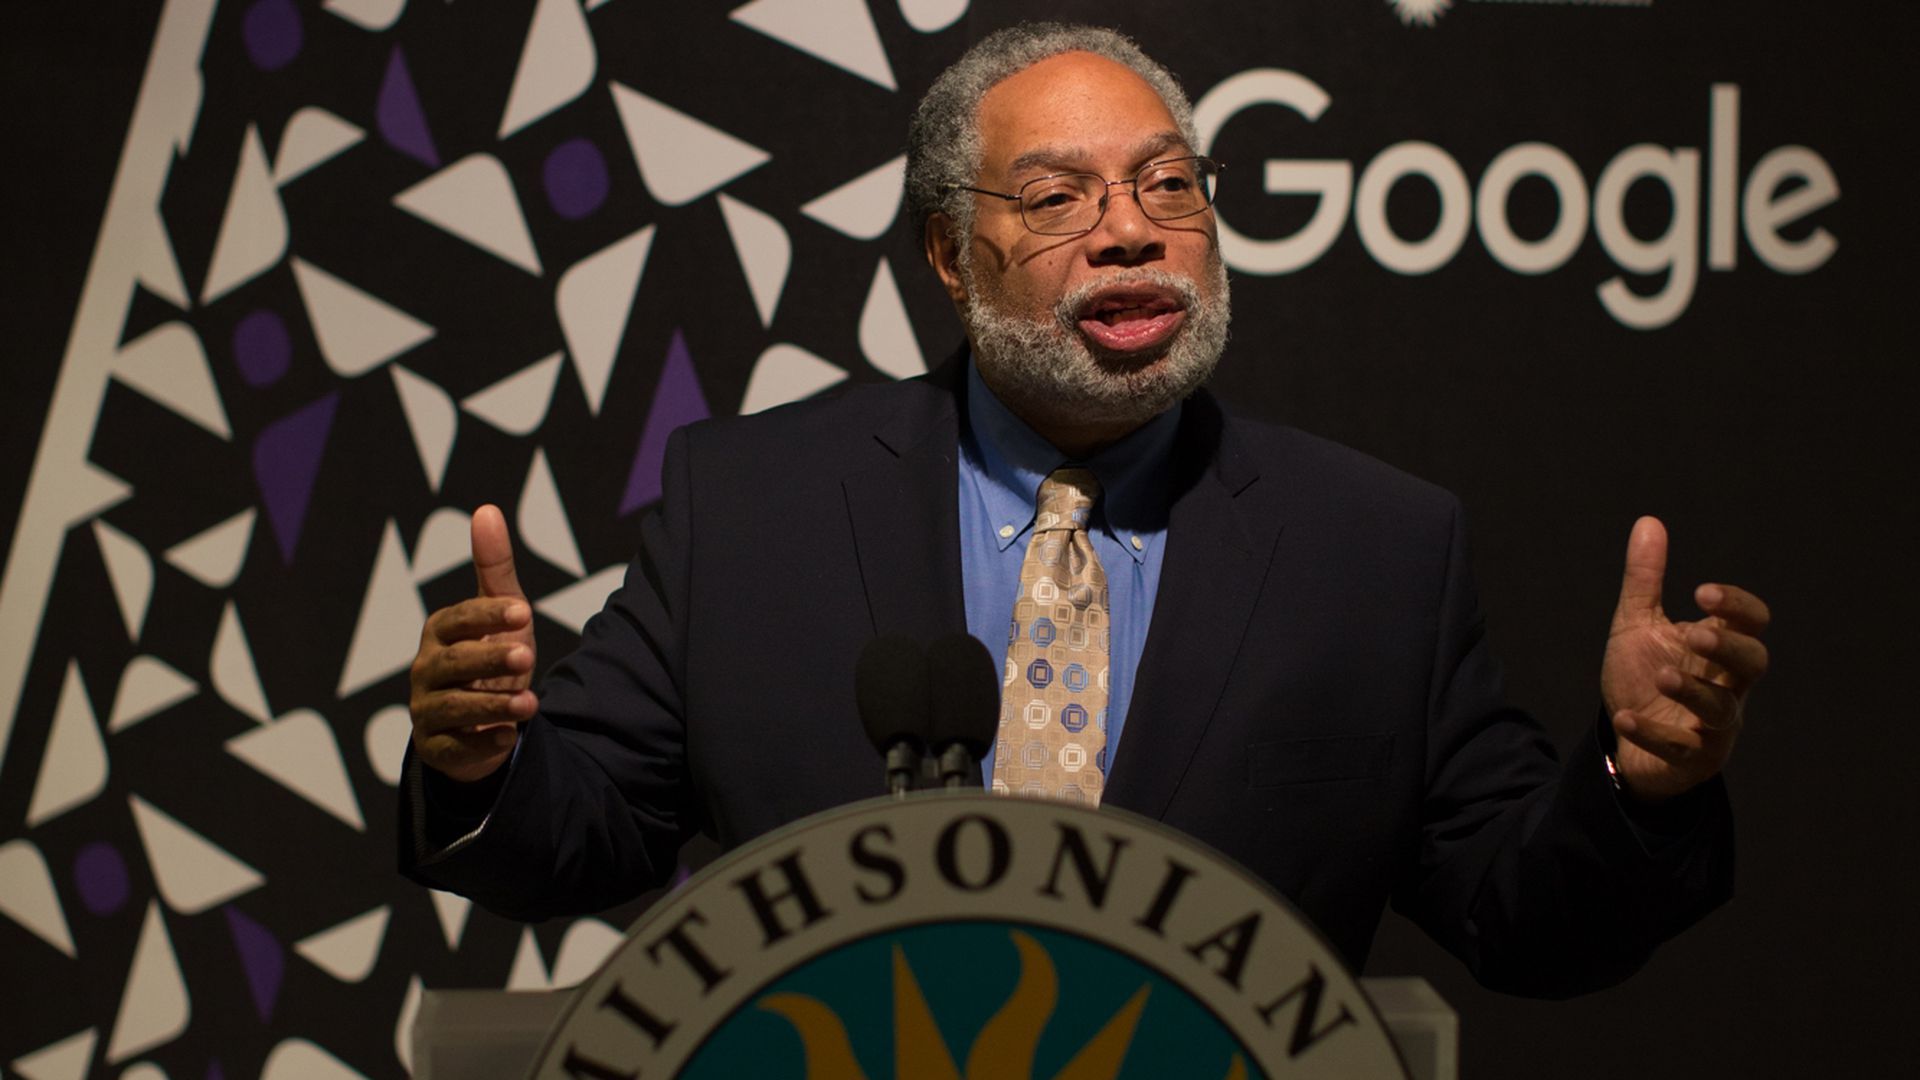 Lonny Bunch, founding director of the Smithsonian's National Museum of African American History and Culture, speaking at a podium